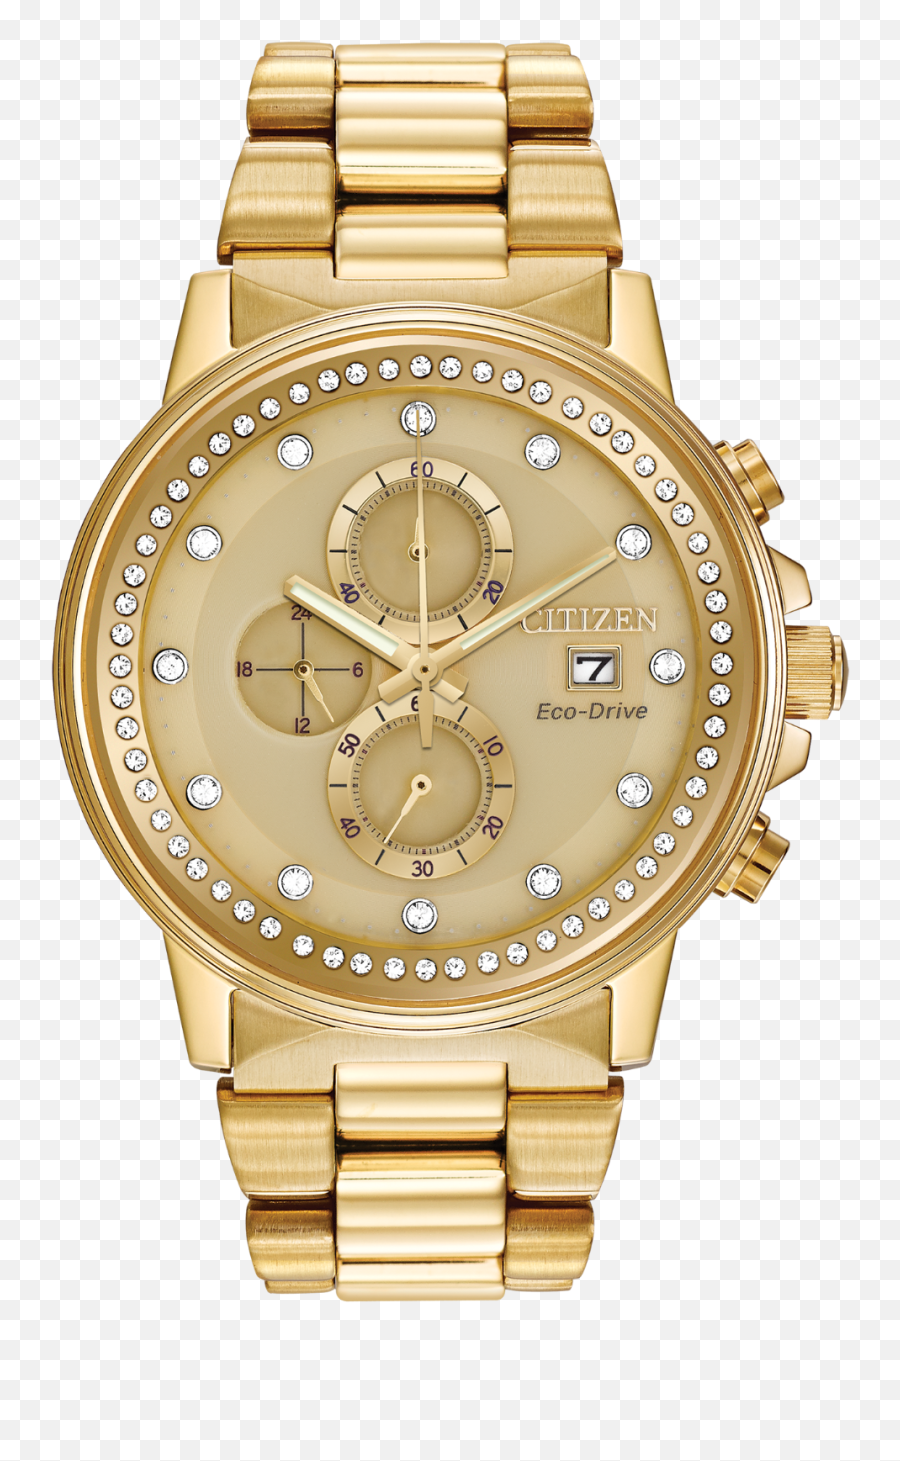 Download Chandler - Gold Eco Drive Citizen Watches Png,Watch Transparent Background